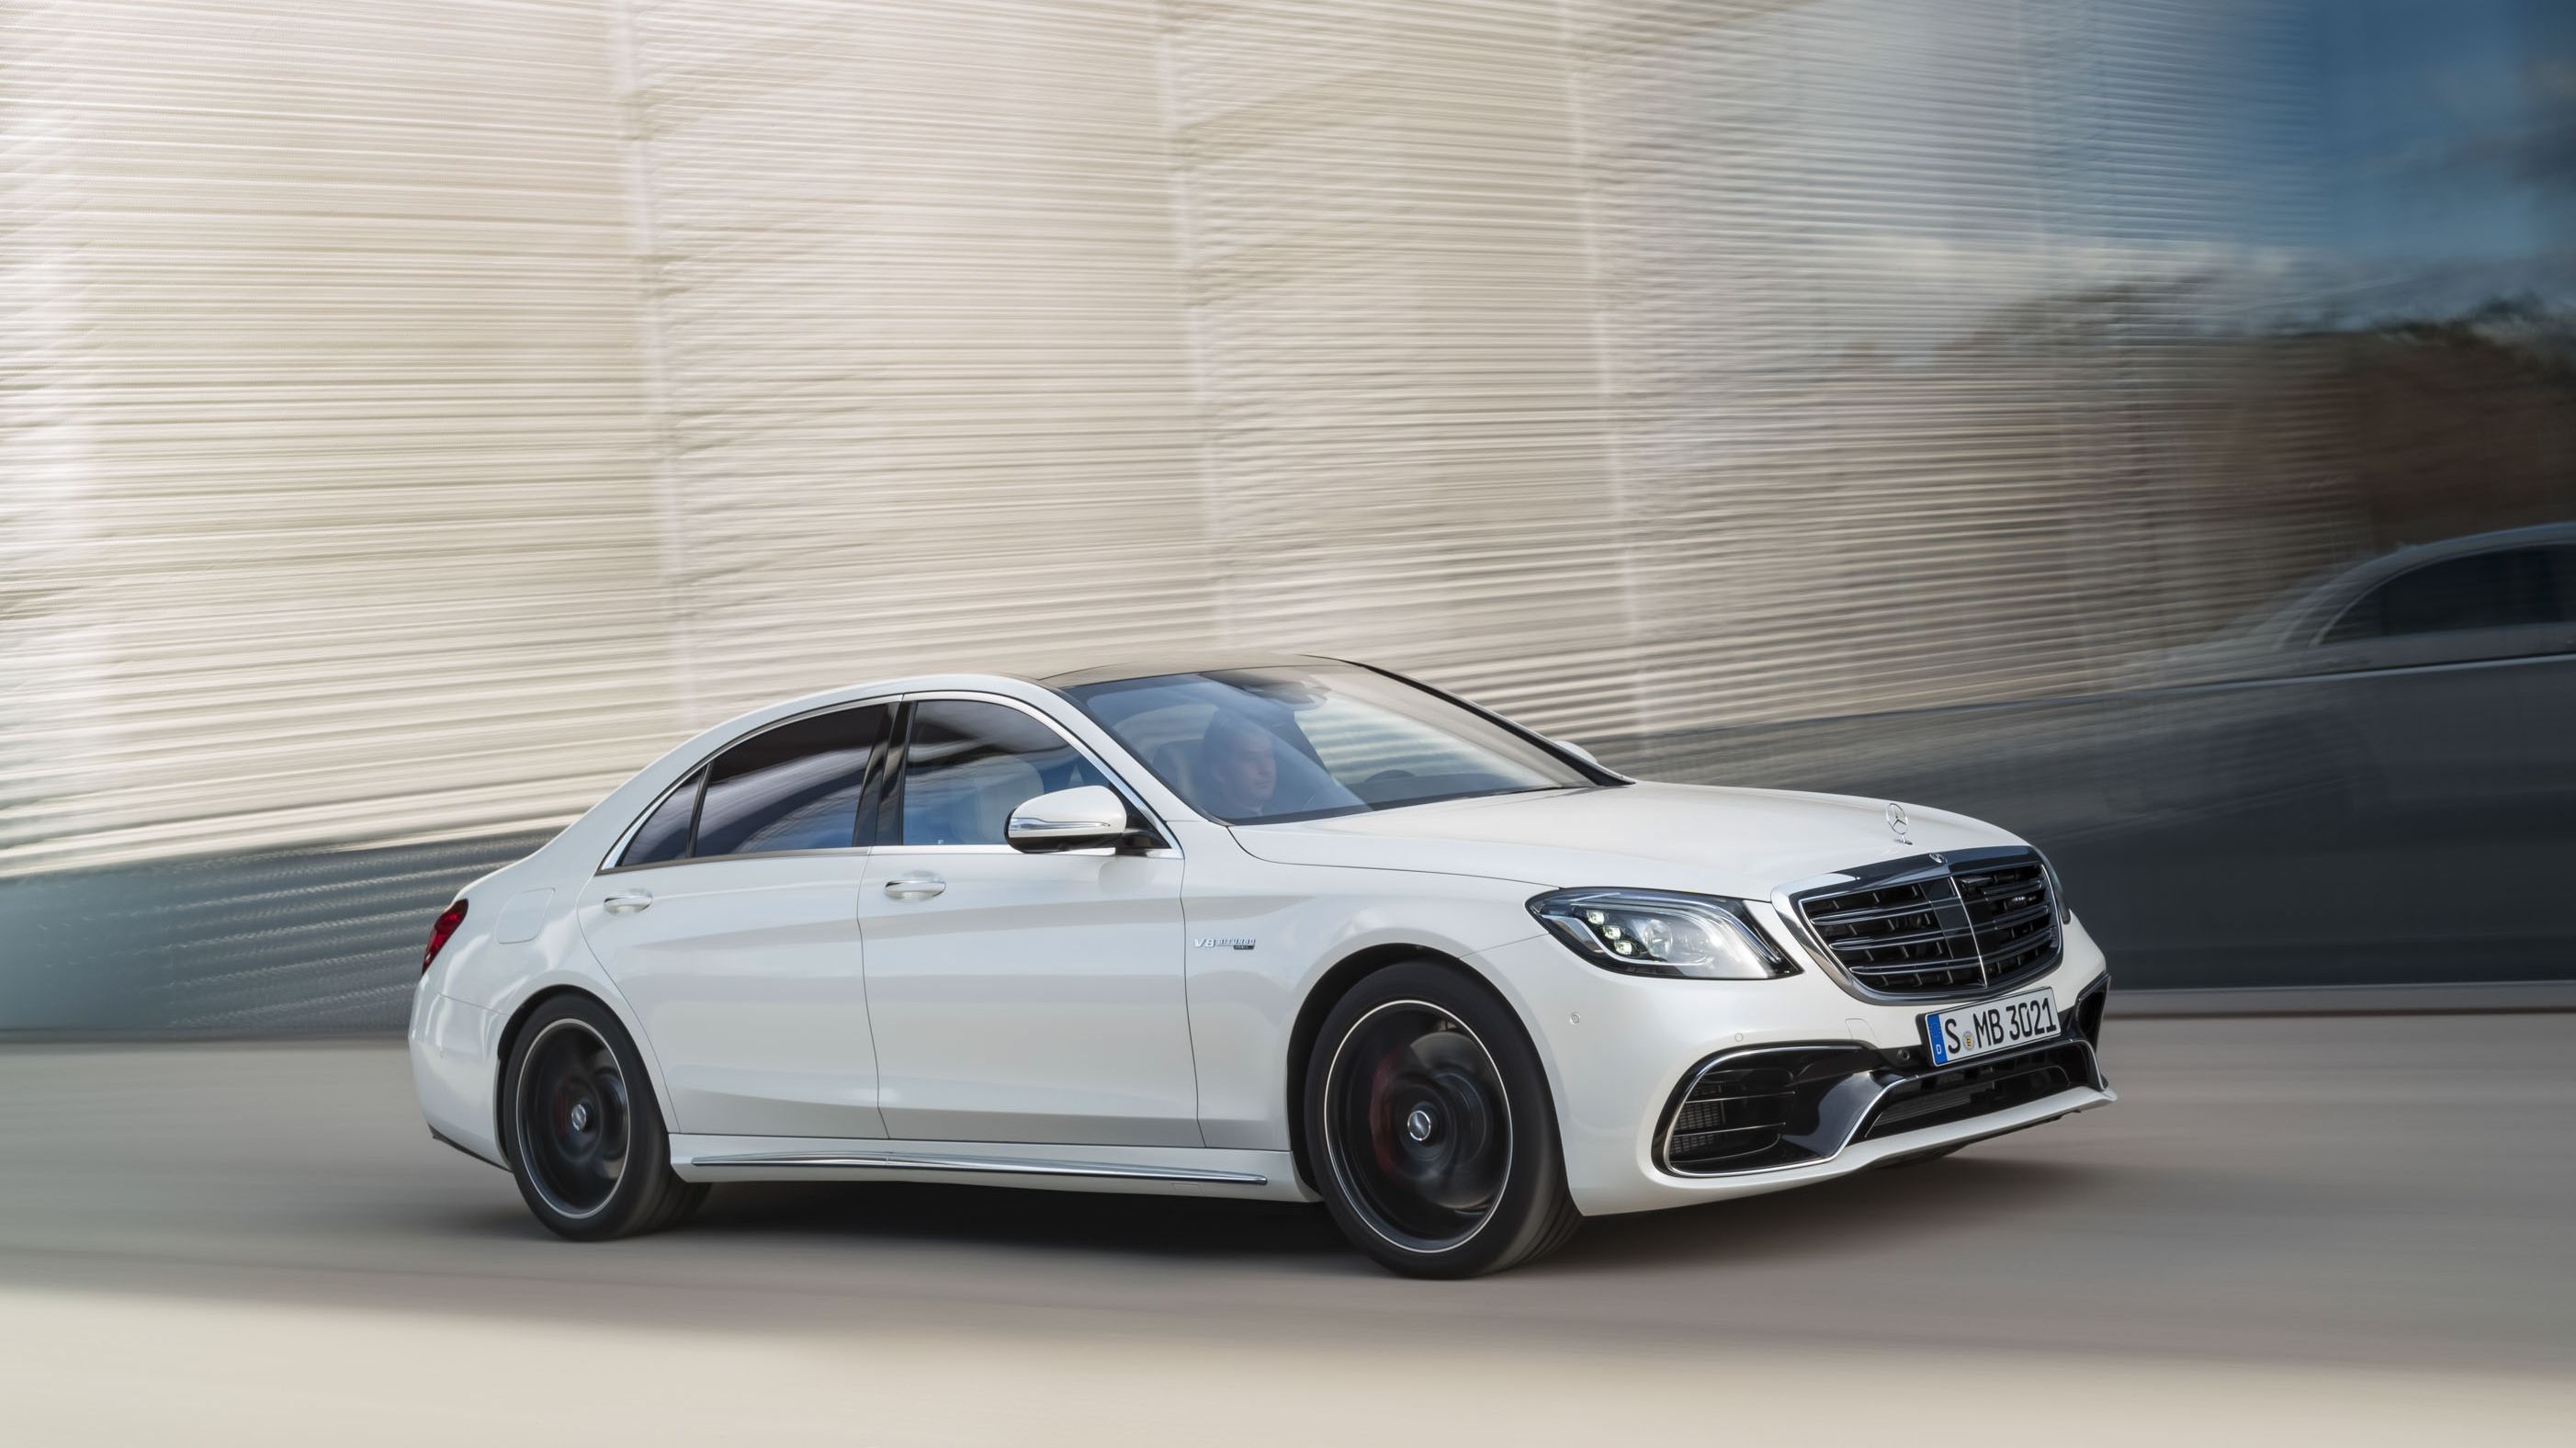 Mercedes AMG S63 Picture, Photo, Wallpaper